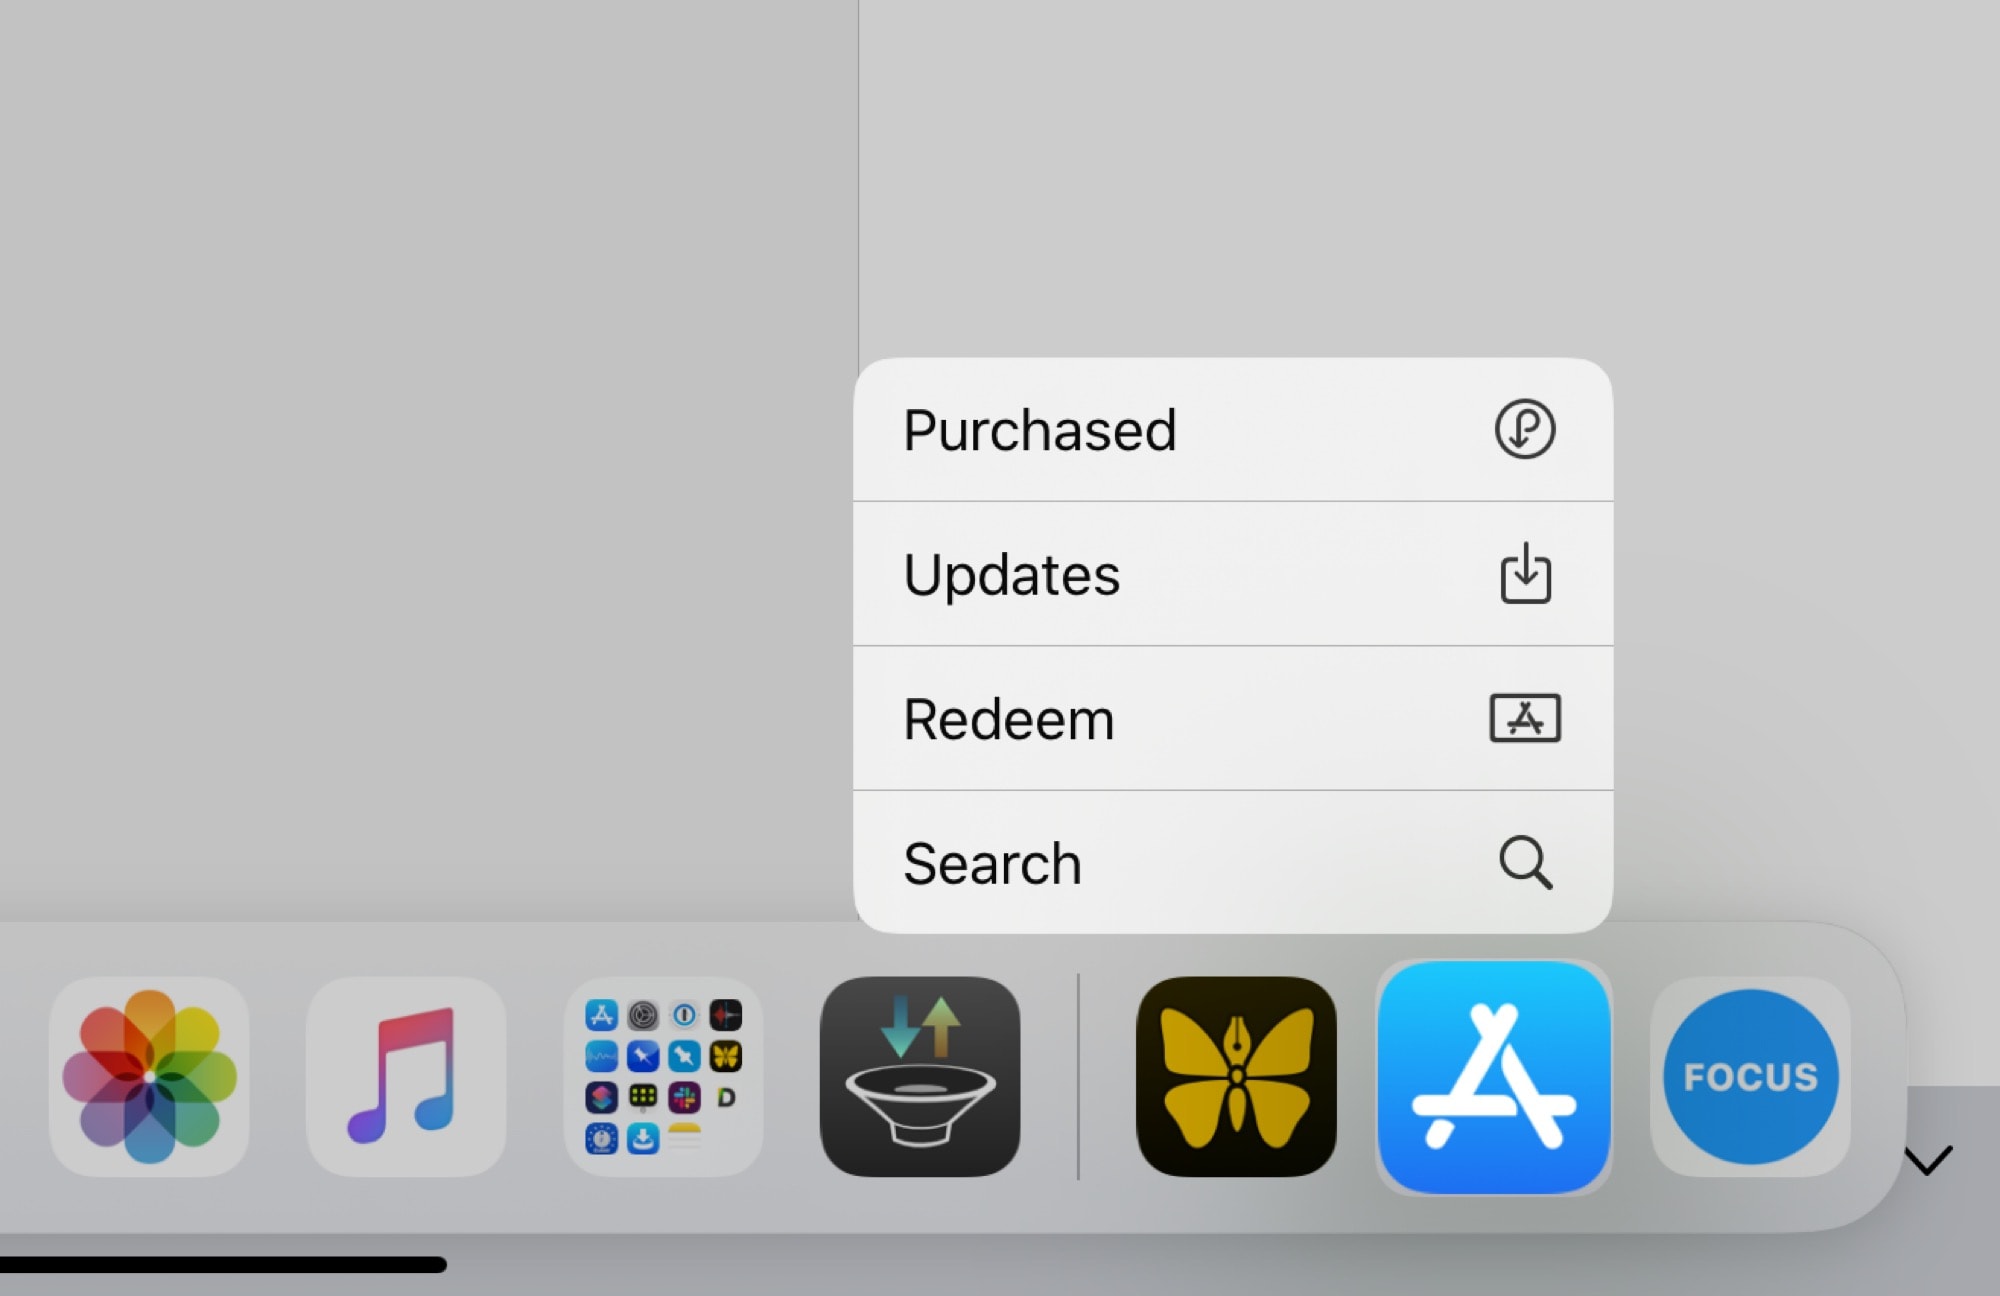   Press and hold the App Store icon on iPadOS 13. 